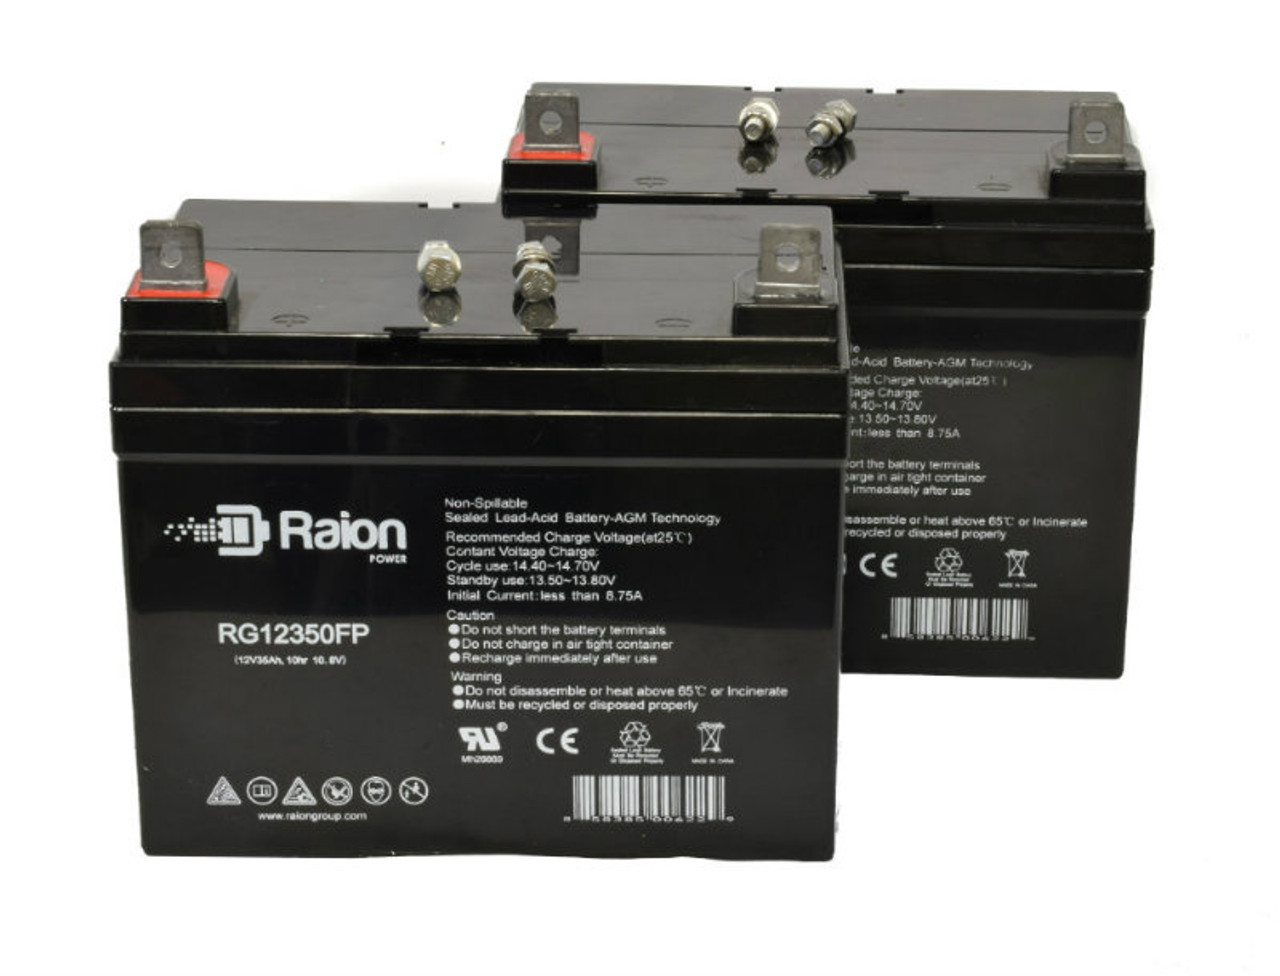 Raion Power Replacement 12V 35Ah Lawn Mower Battery for Black & Decker CMM630 TYPE1 - 2 Pack